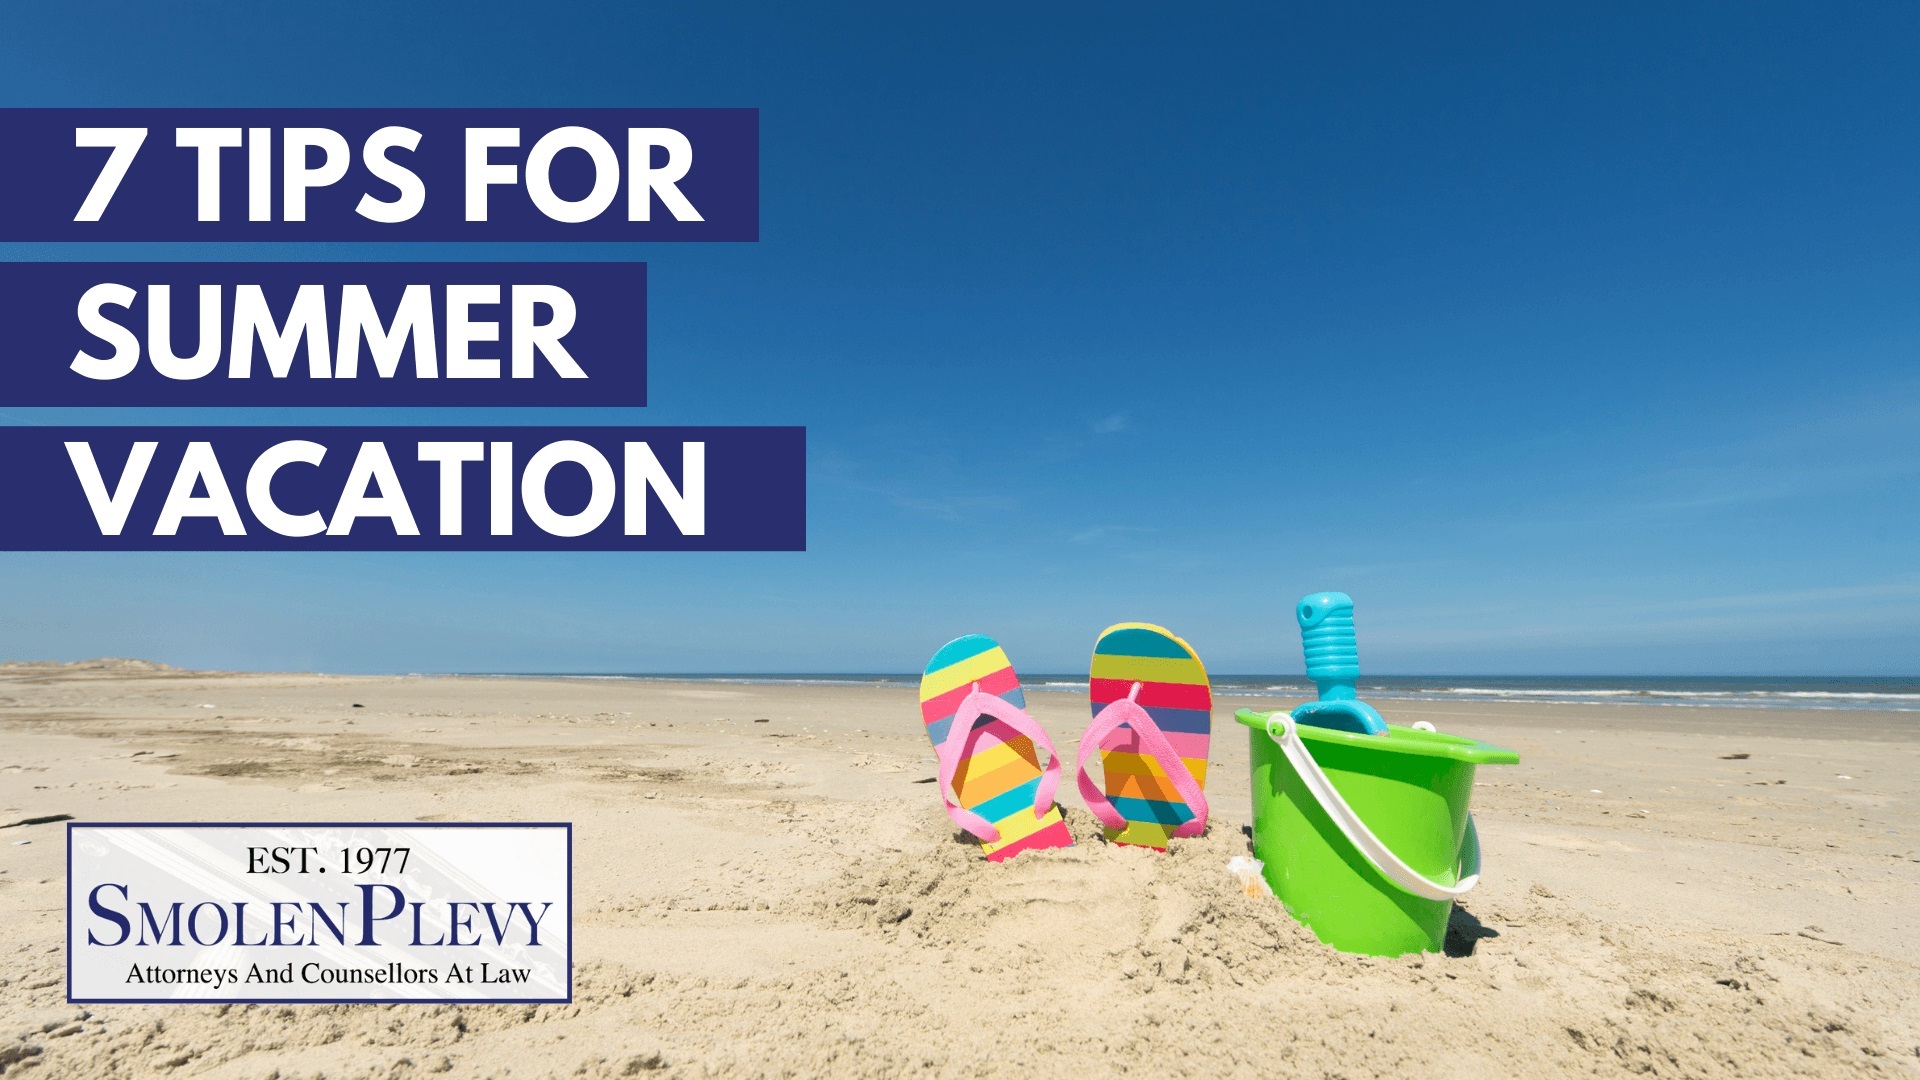 7 Summer Vacation Tips for Divorced or Separated Parents